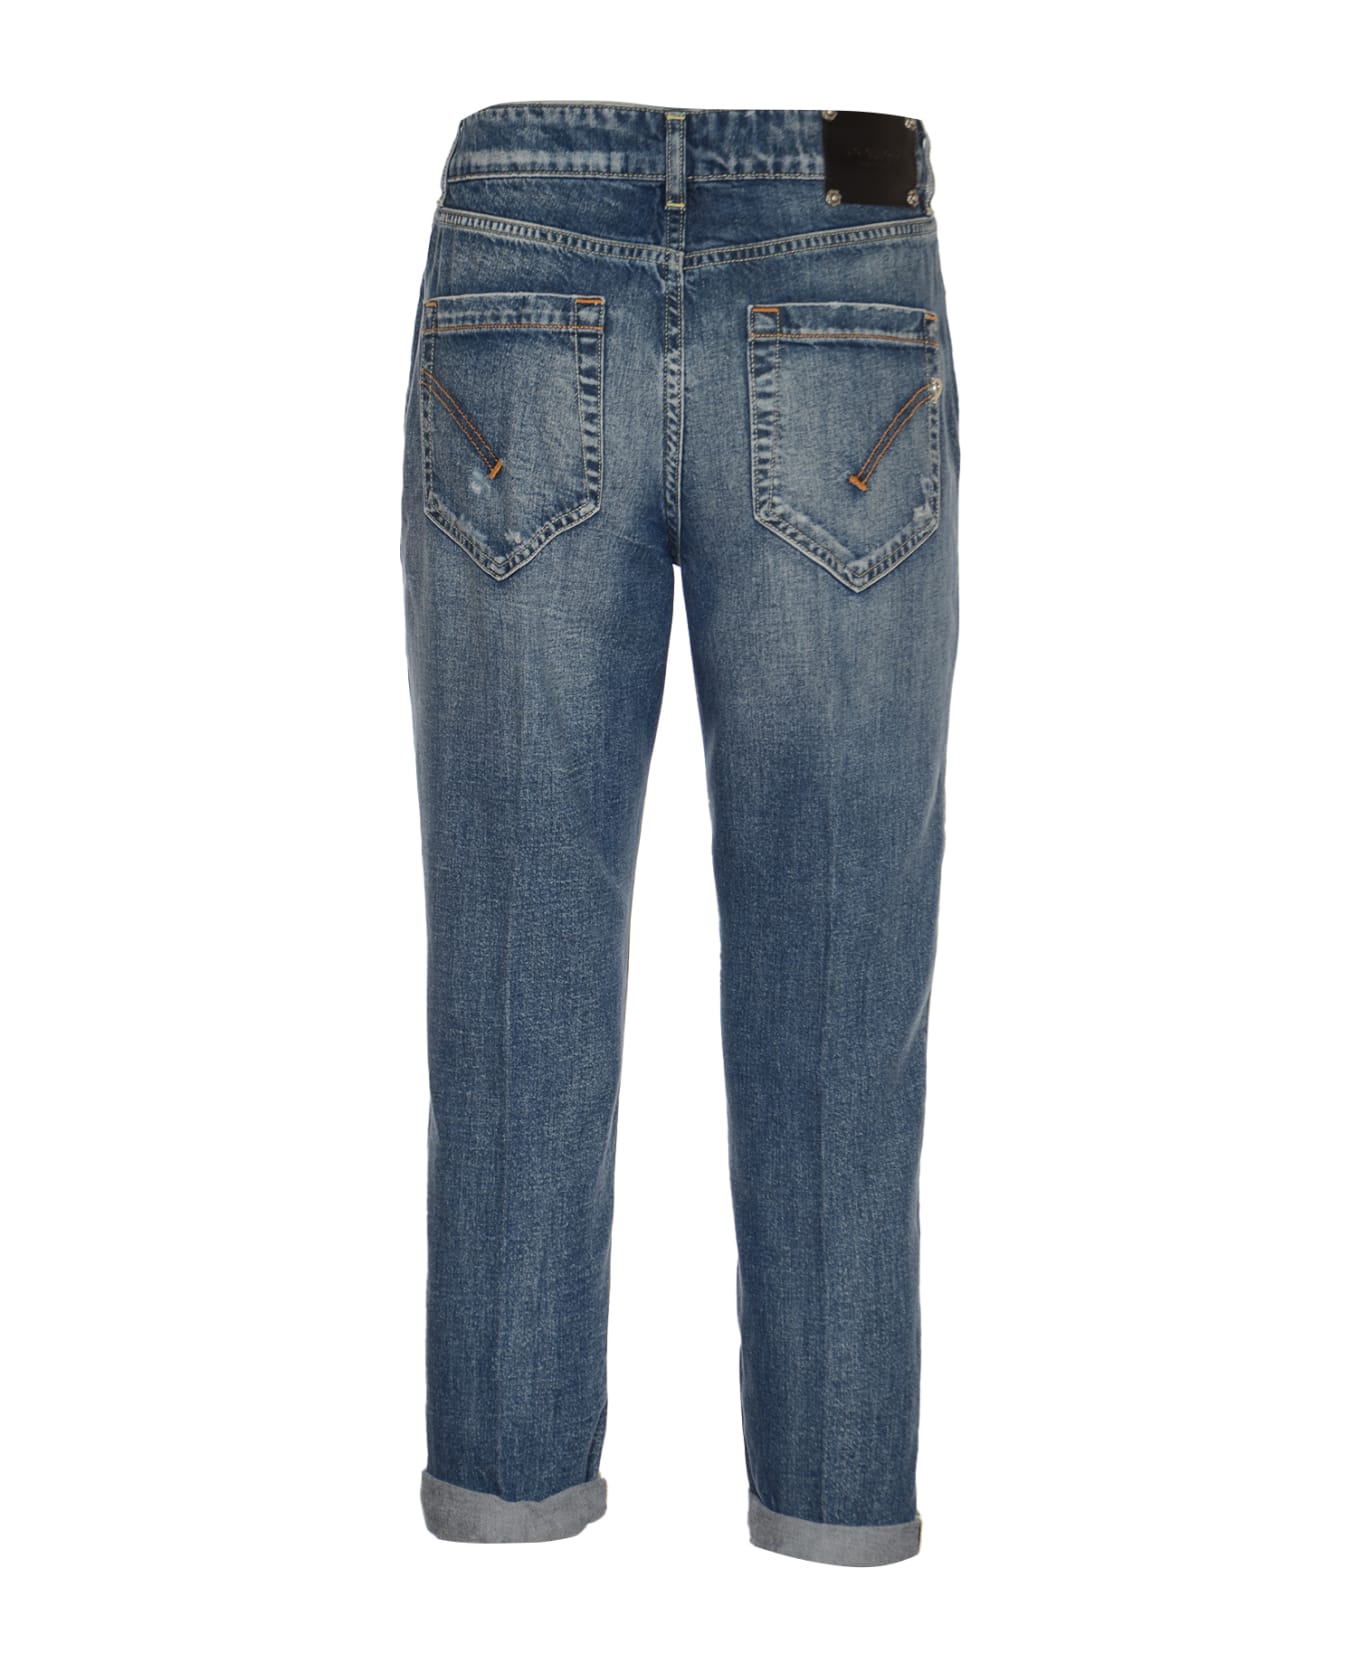 Dondup Distressed Buttoned Jeans デニム